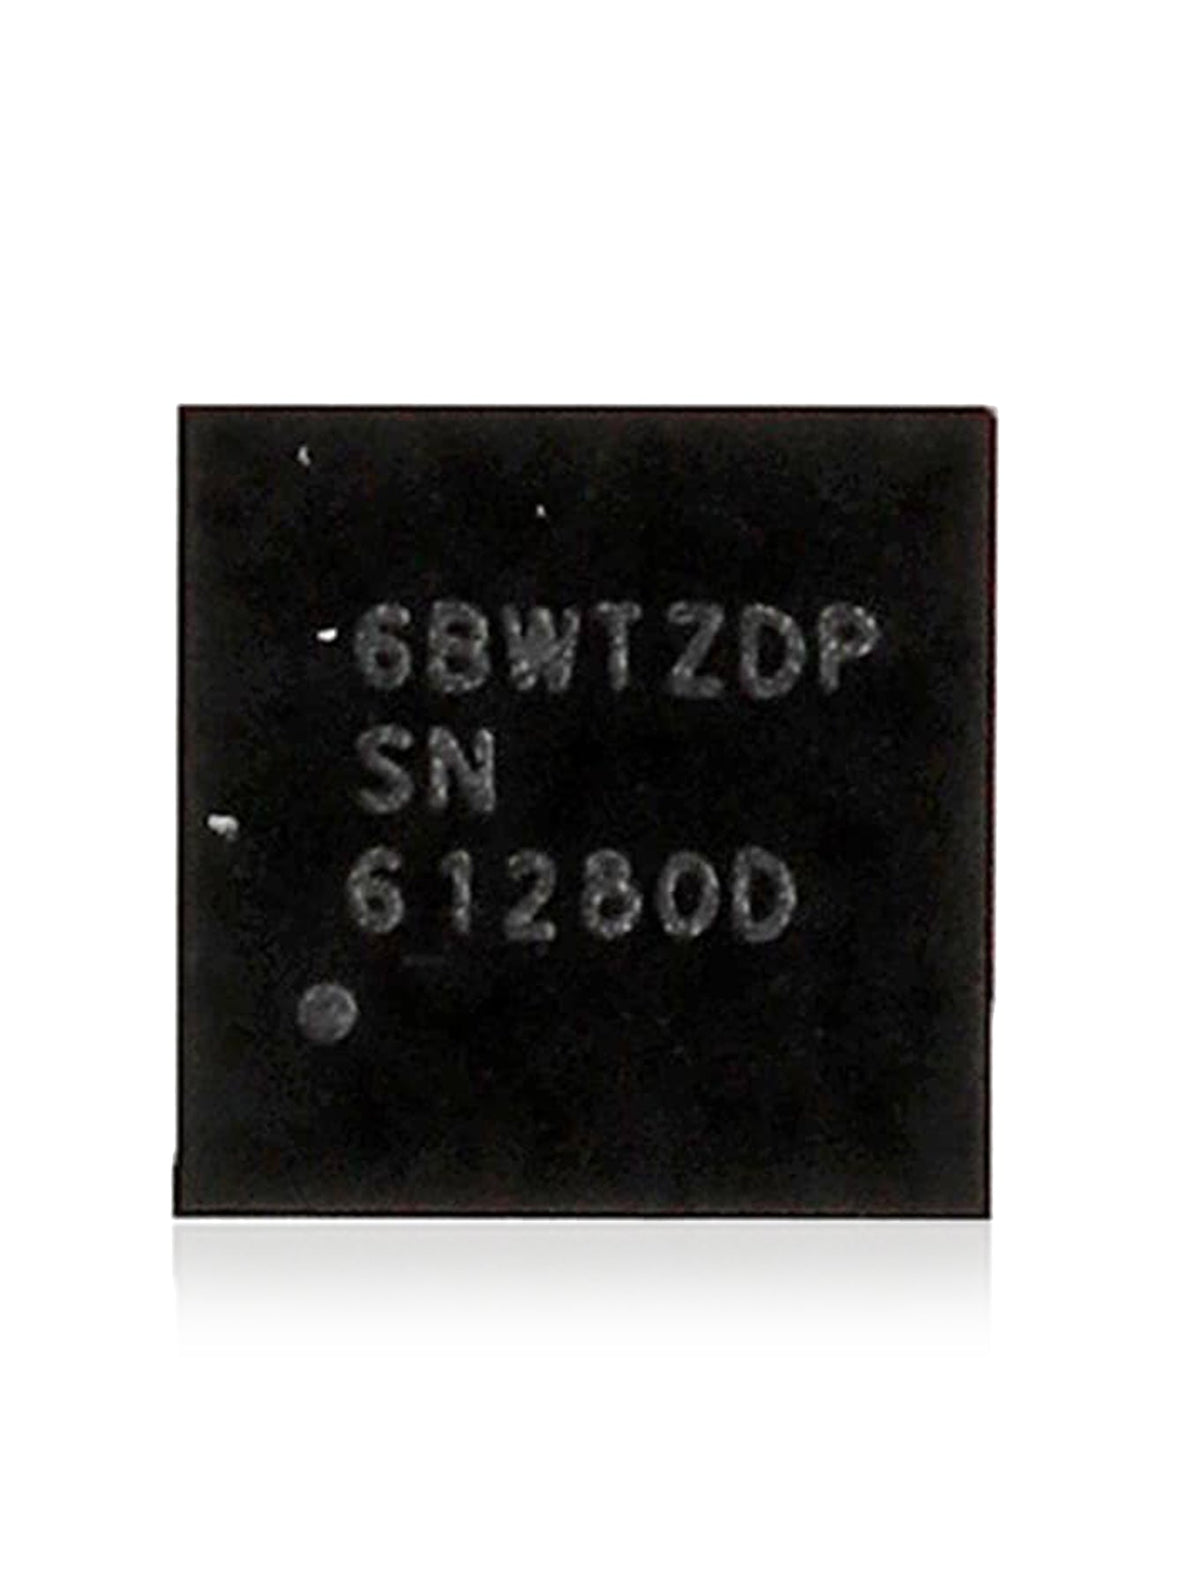 CAMERA / BOOST POWER SUPPLY IC COMPATIBLE WITH IPHONE 7 / 7 PLUS (U2301 / SN61280D / 16 PINS)